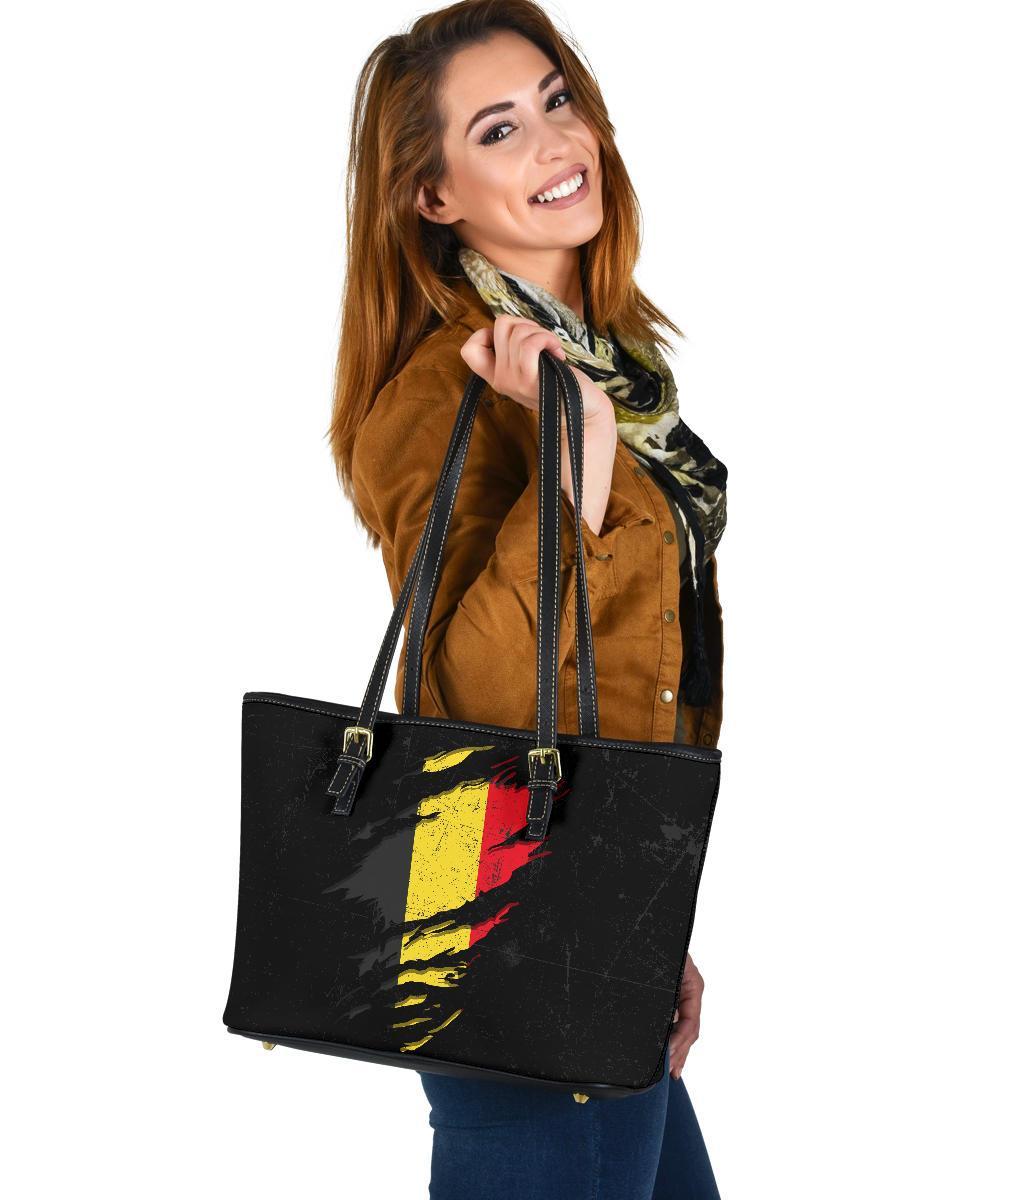 belgium-in-me-leather-tote-bag-special-grunge-style